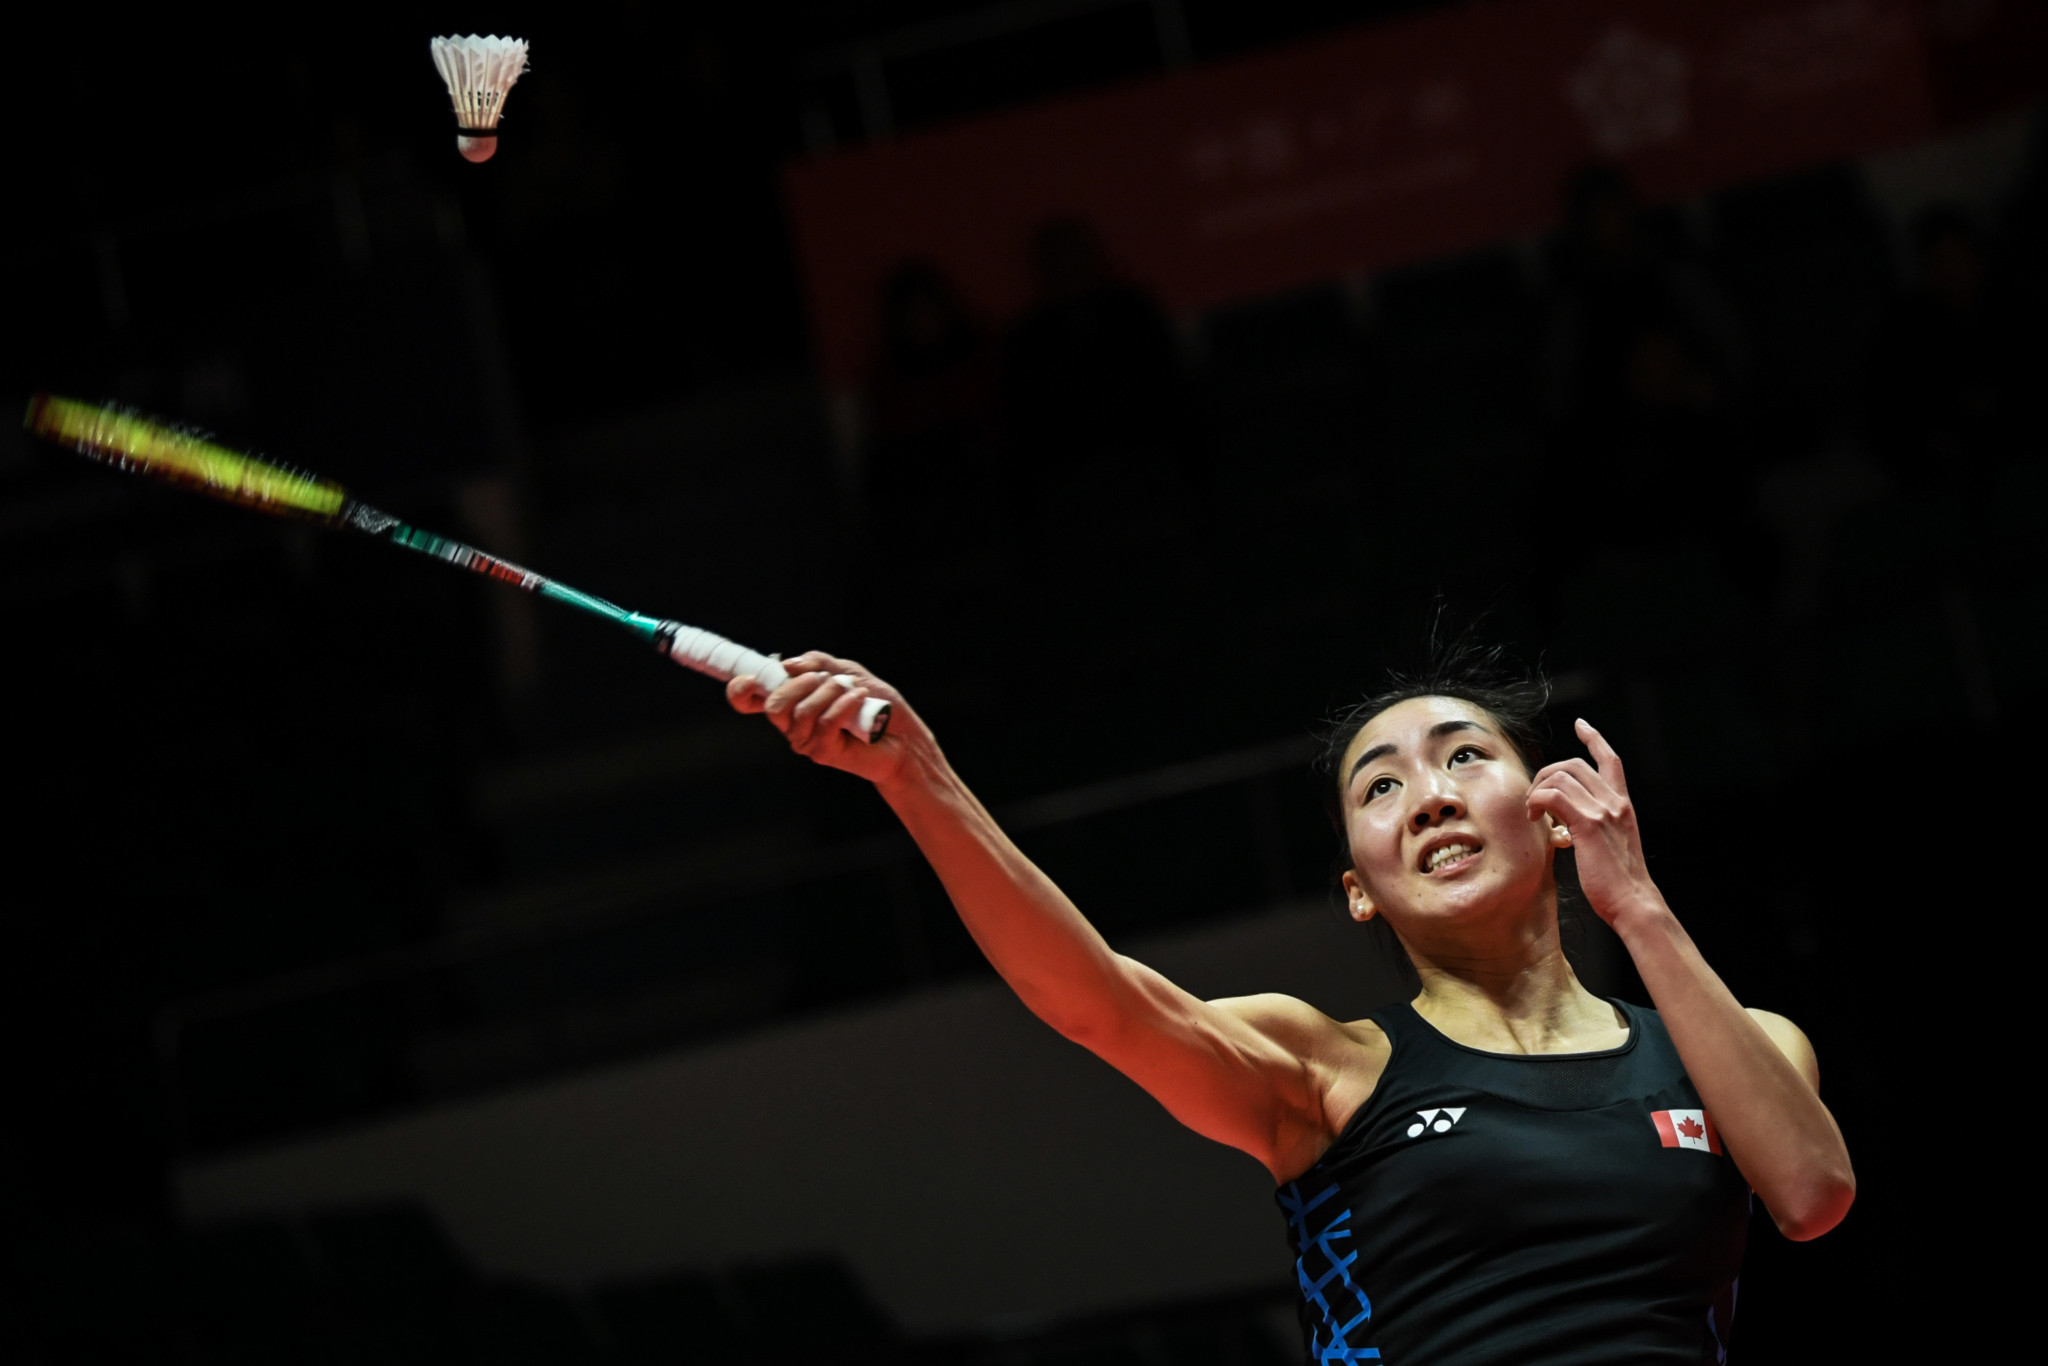 Li makes successful start to title defence at Pan American Badminton Championships